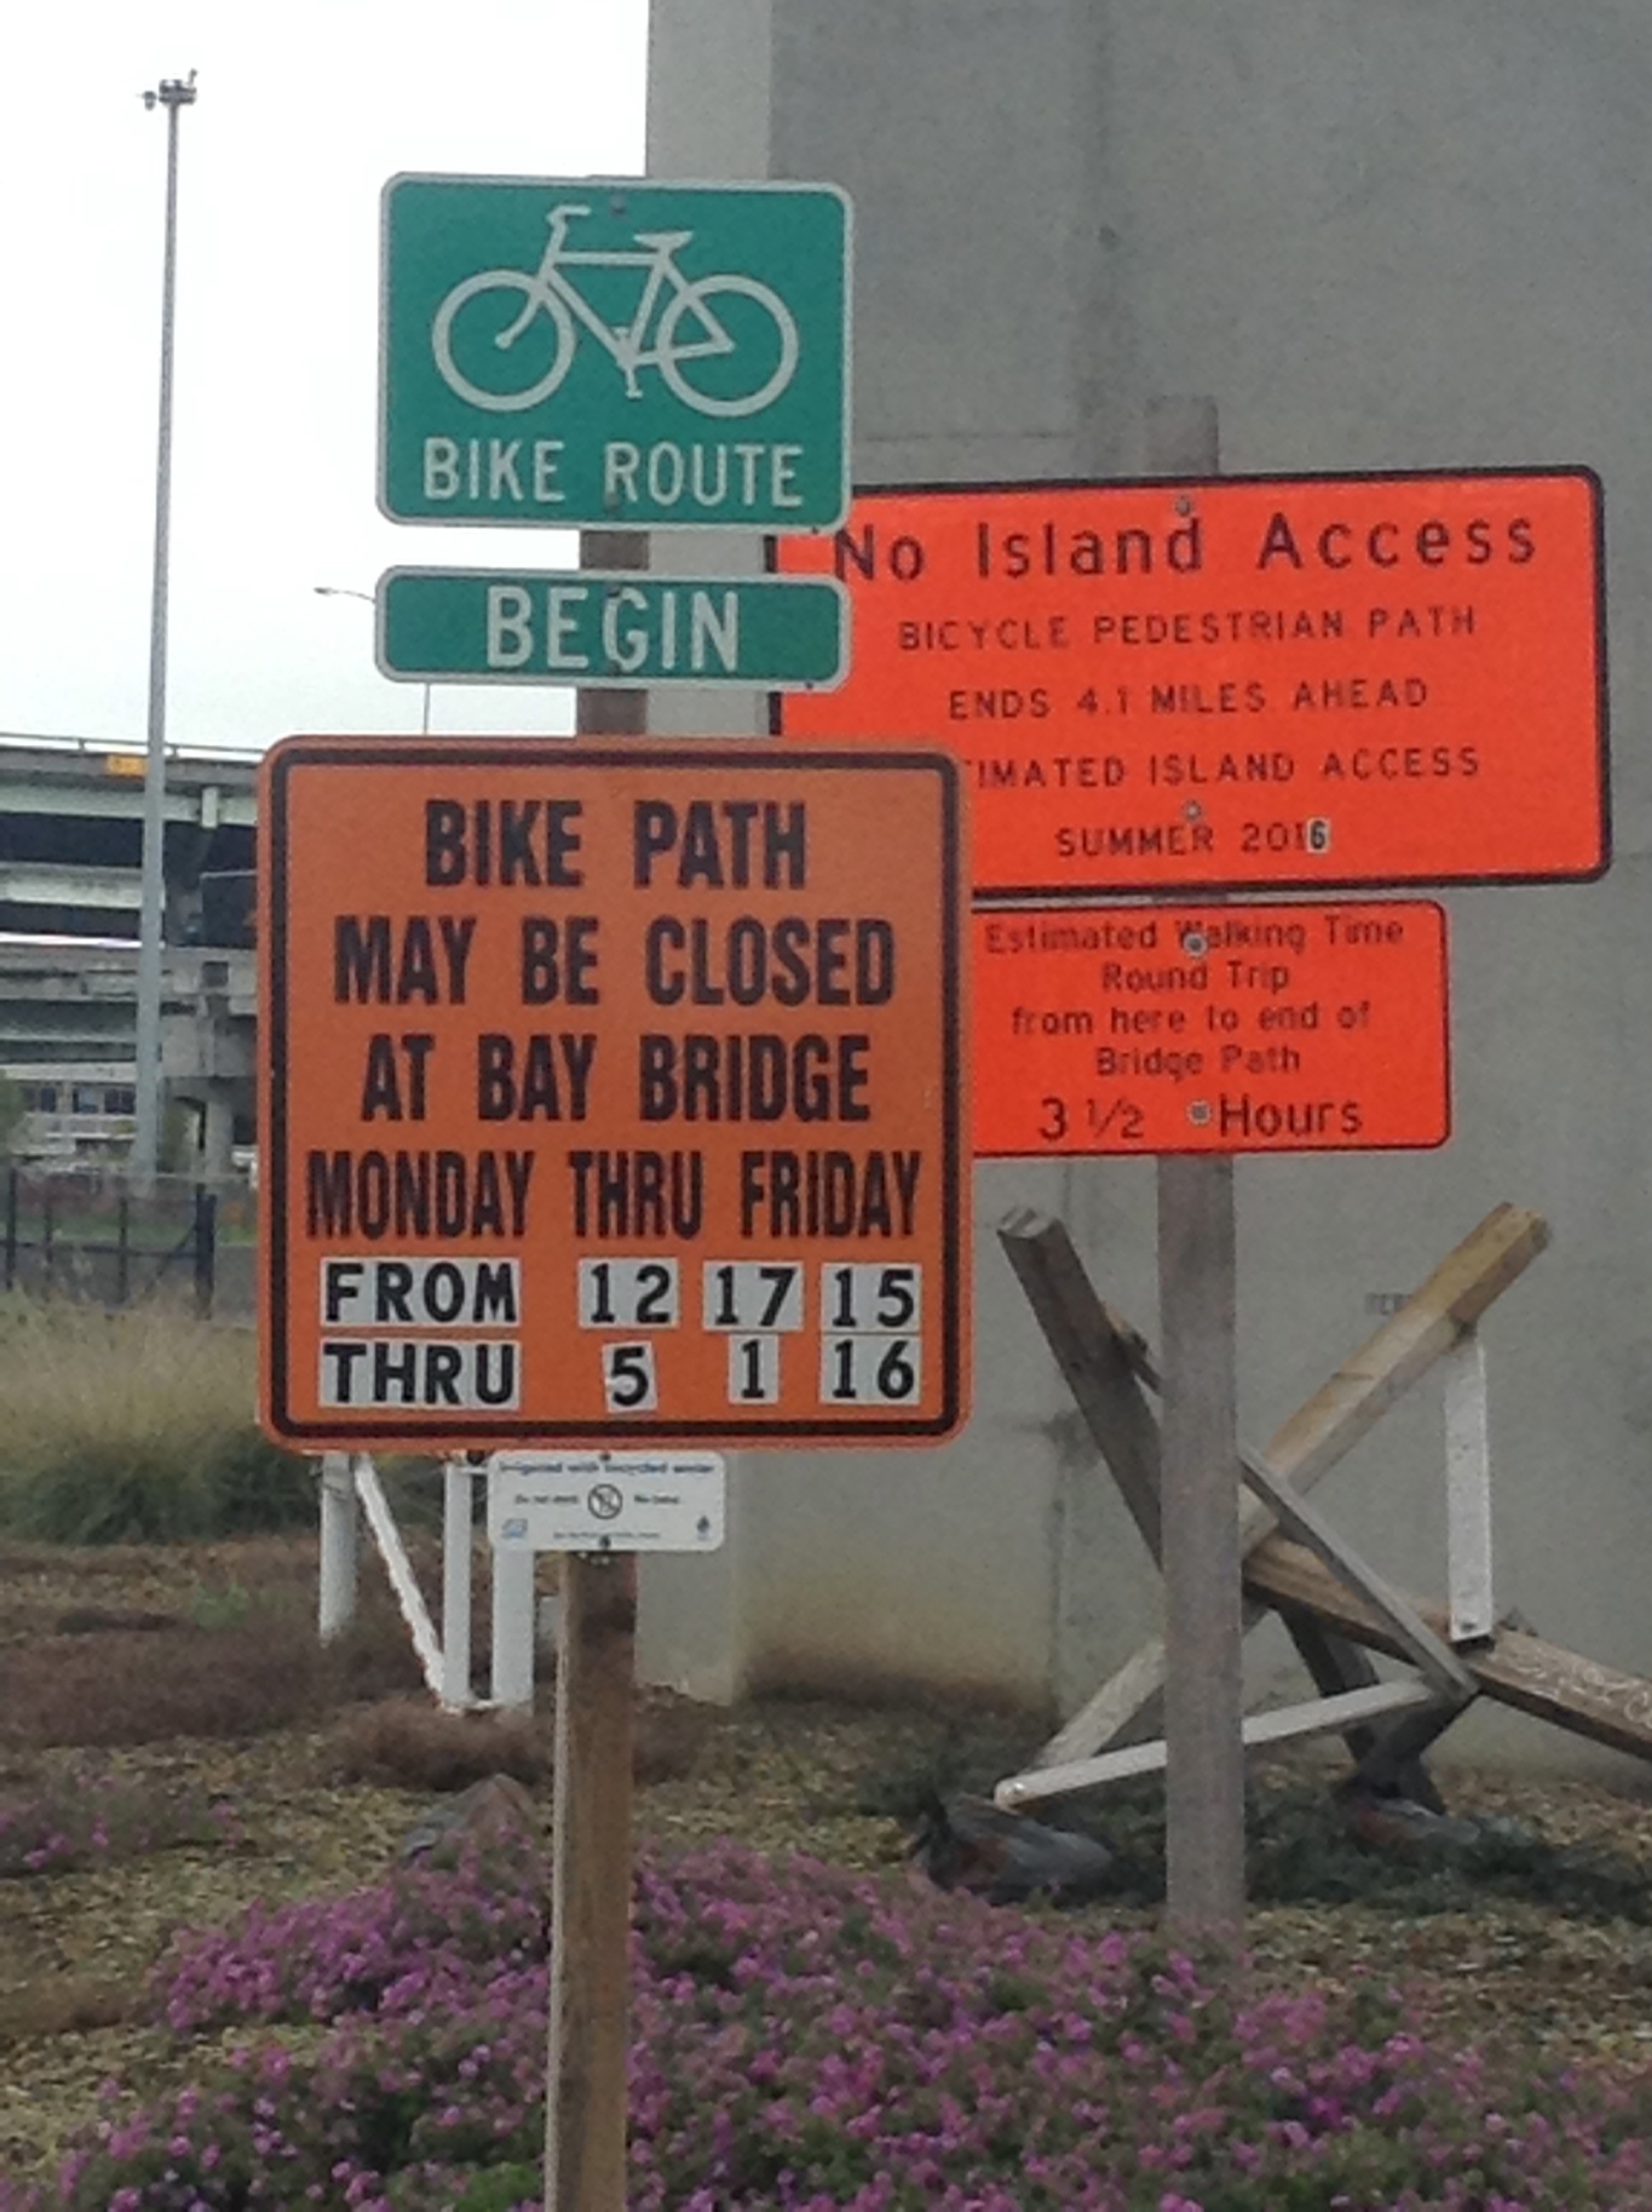 Old signs warn that the bridge path may be closed on weekdays; they haven't been updated to reflect Caltrans' recent announcement.